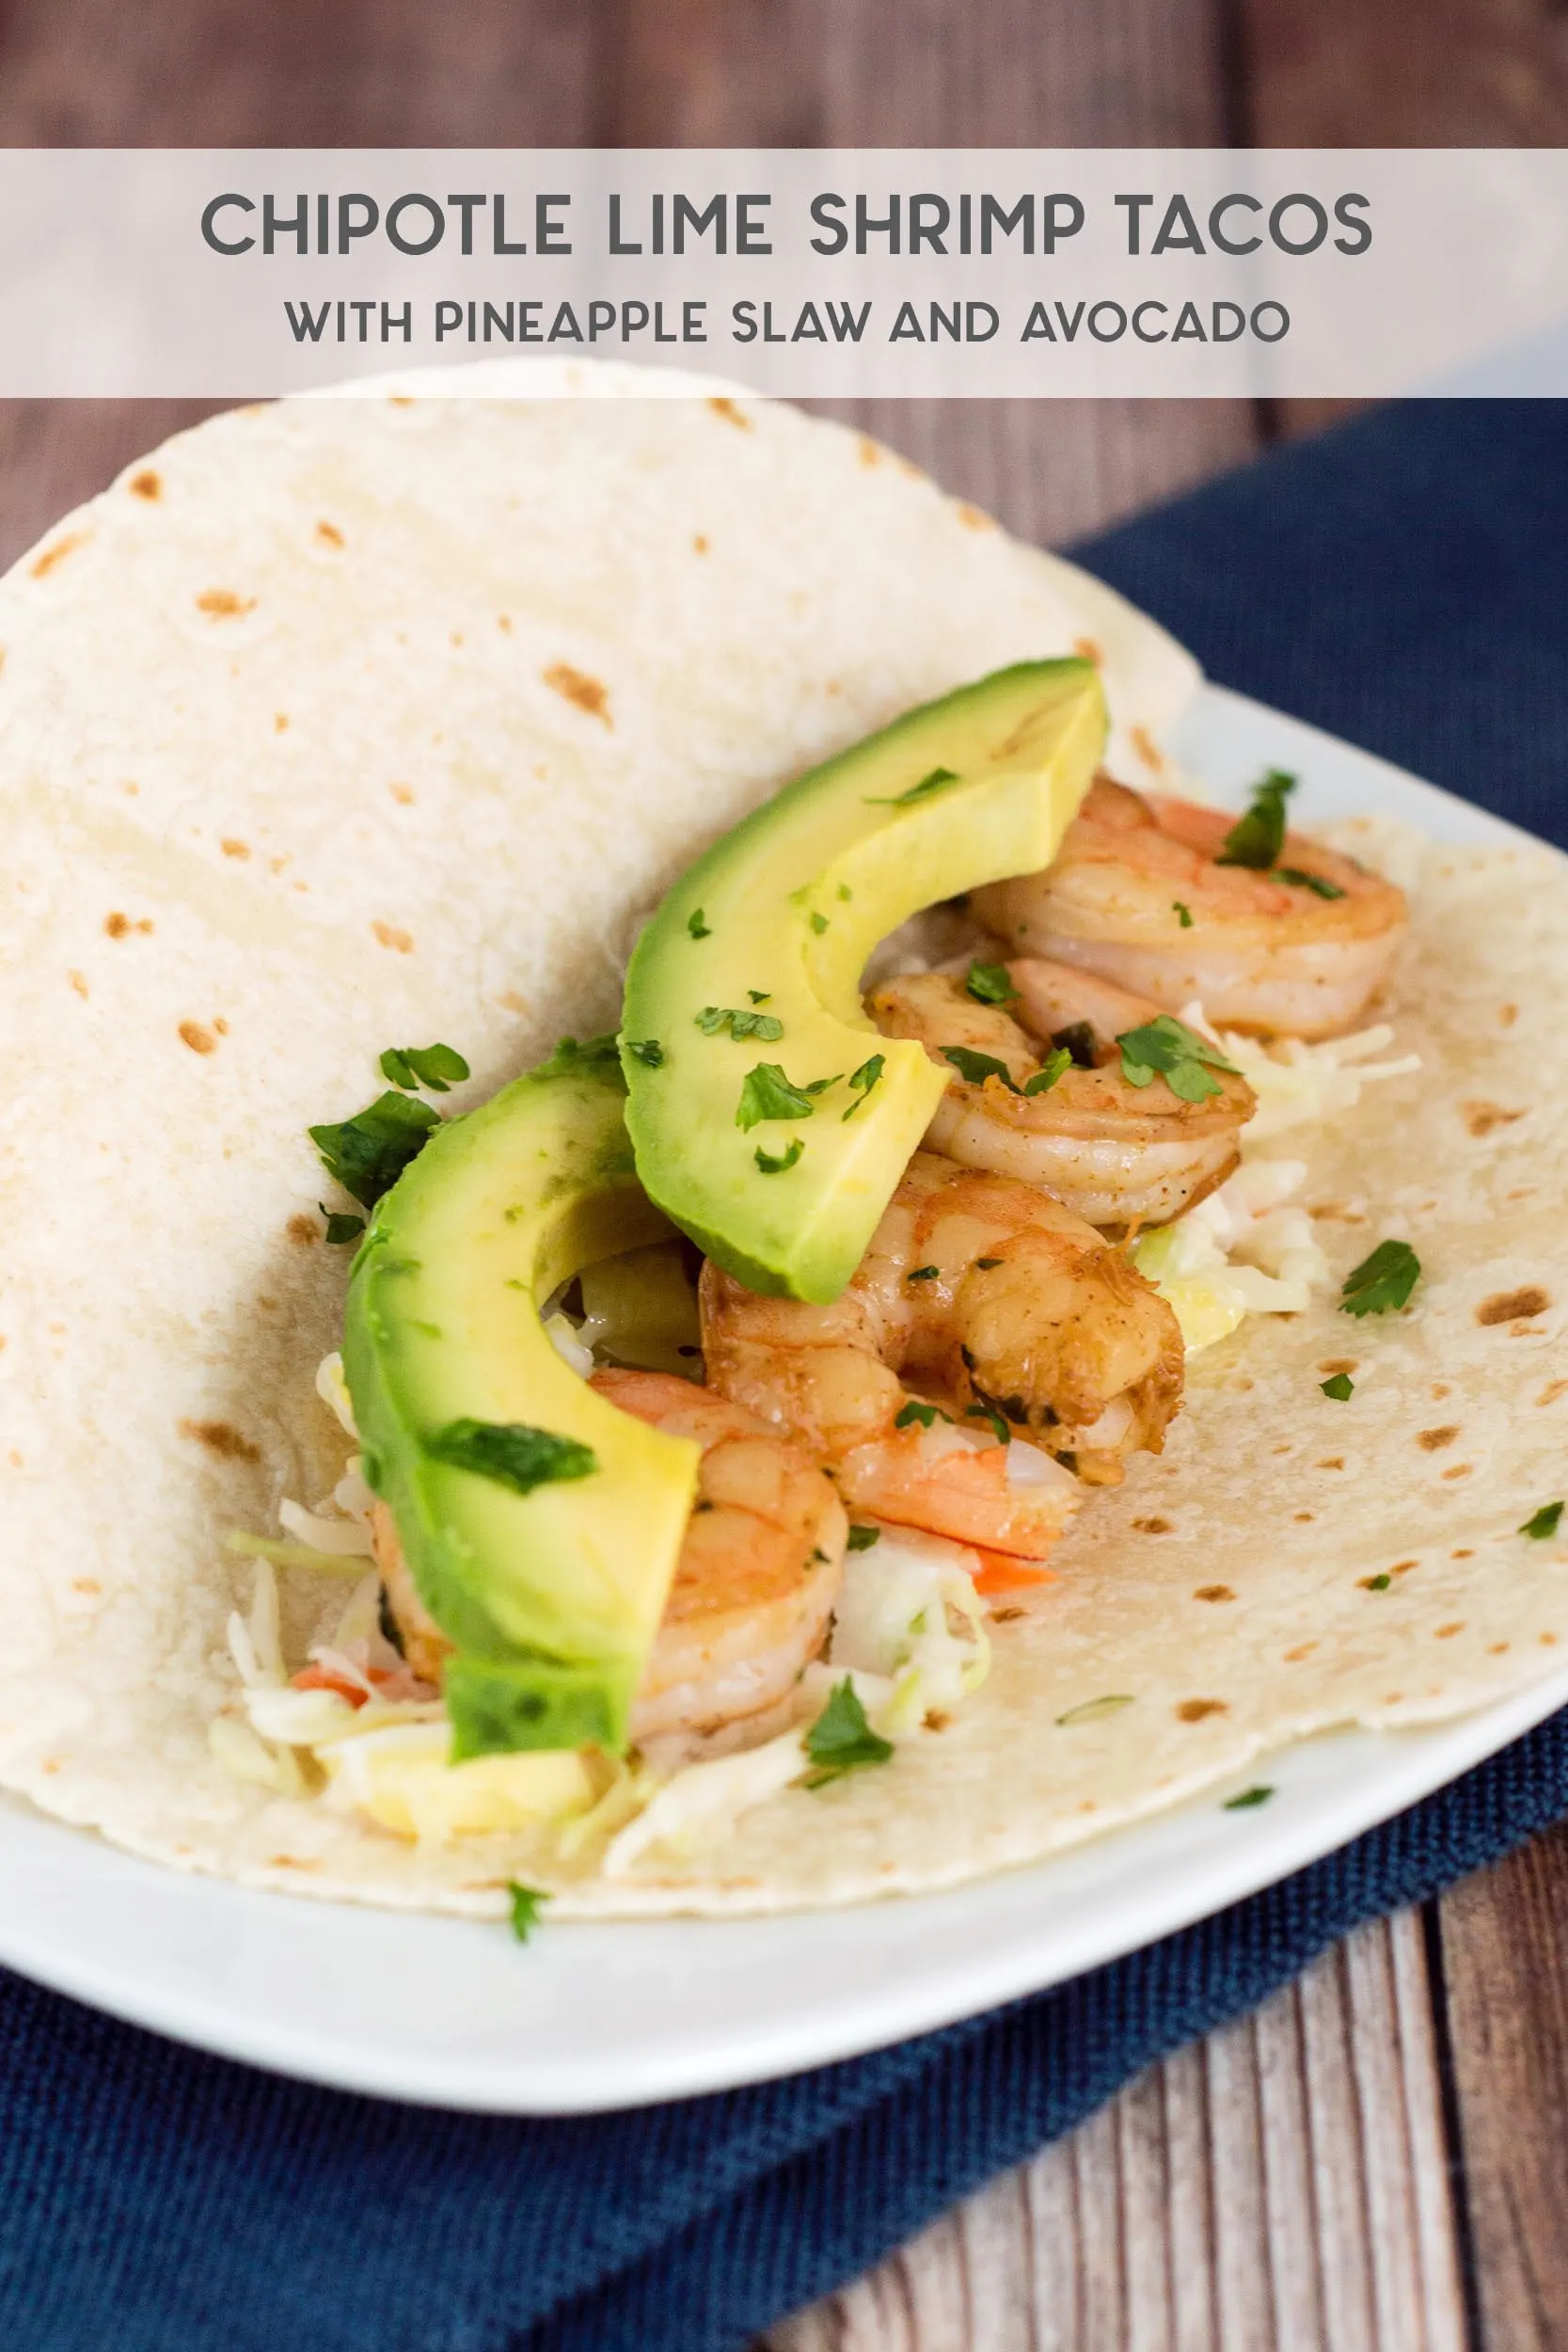 With a touch of avocado and pineapple slaw for some sweetness, these chipotle lime shrimp tacos are the perfect combination of spicy and fruity!